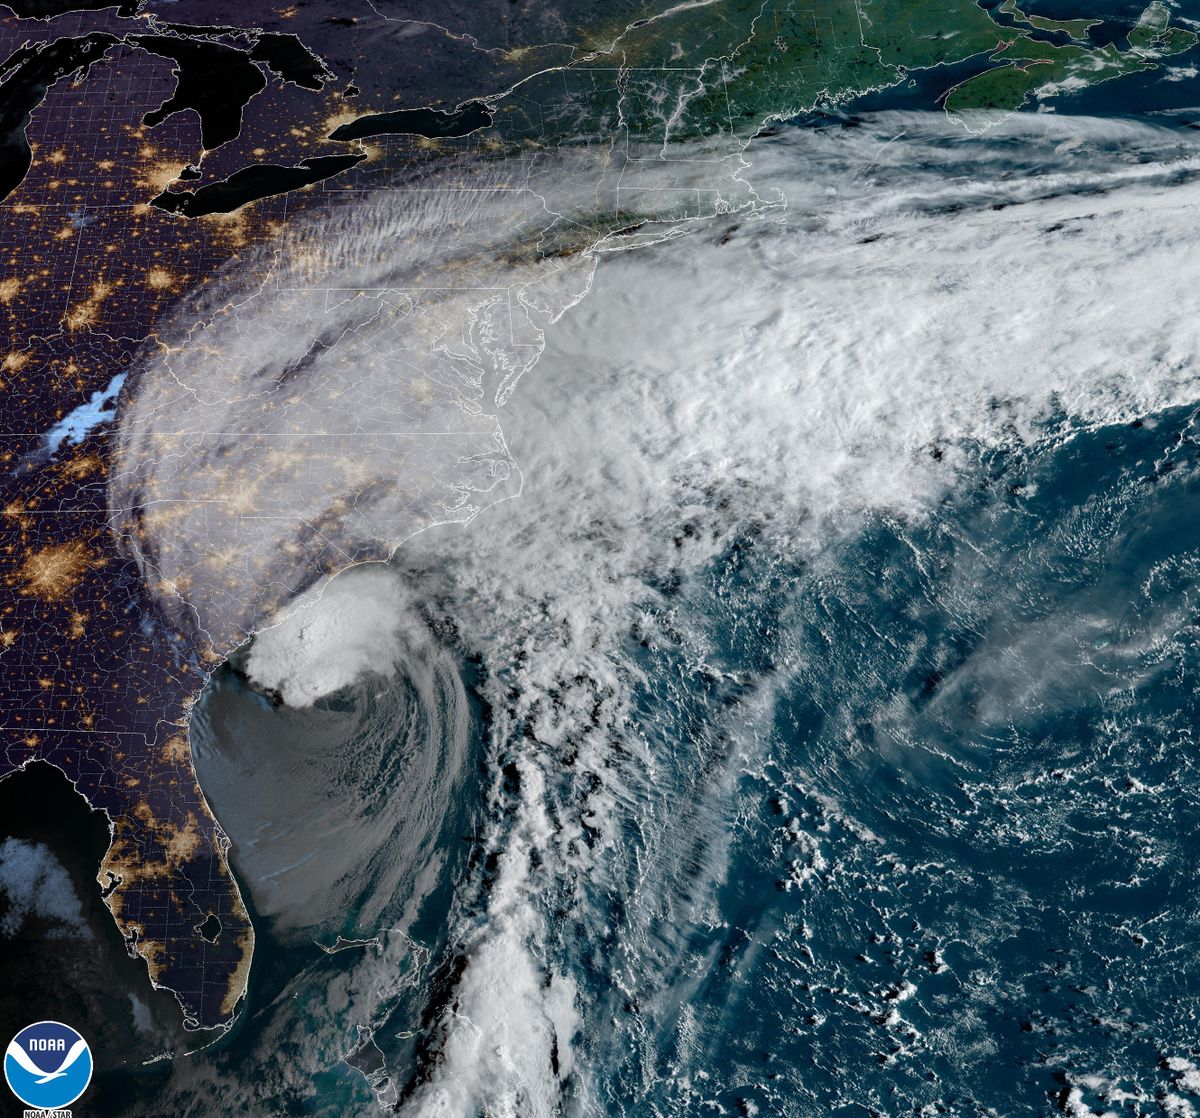 This National Oceanic and Atmospheric Administration (NOAA) satellite handout image shows Hurricane Ian on September 30, 2022 at 12:01 UTC. - Forecasters expect Hurricane Ian to cause life-threatening storm surges in the Carolinas on Friday after unleashing devastation in Florida, where it left a yet unknown number of dead in its wake.